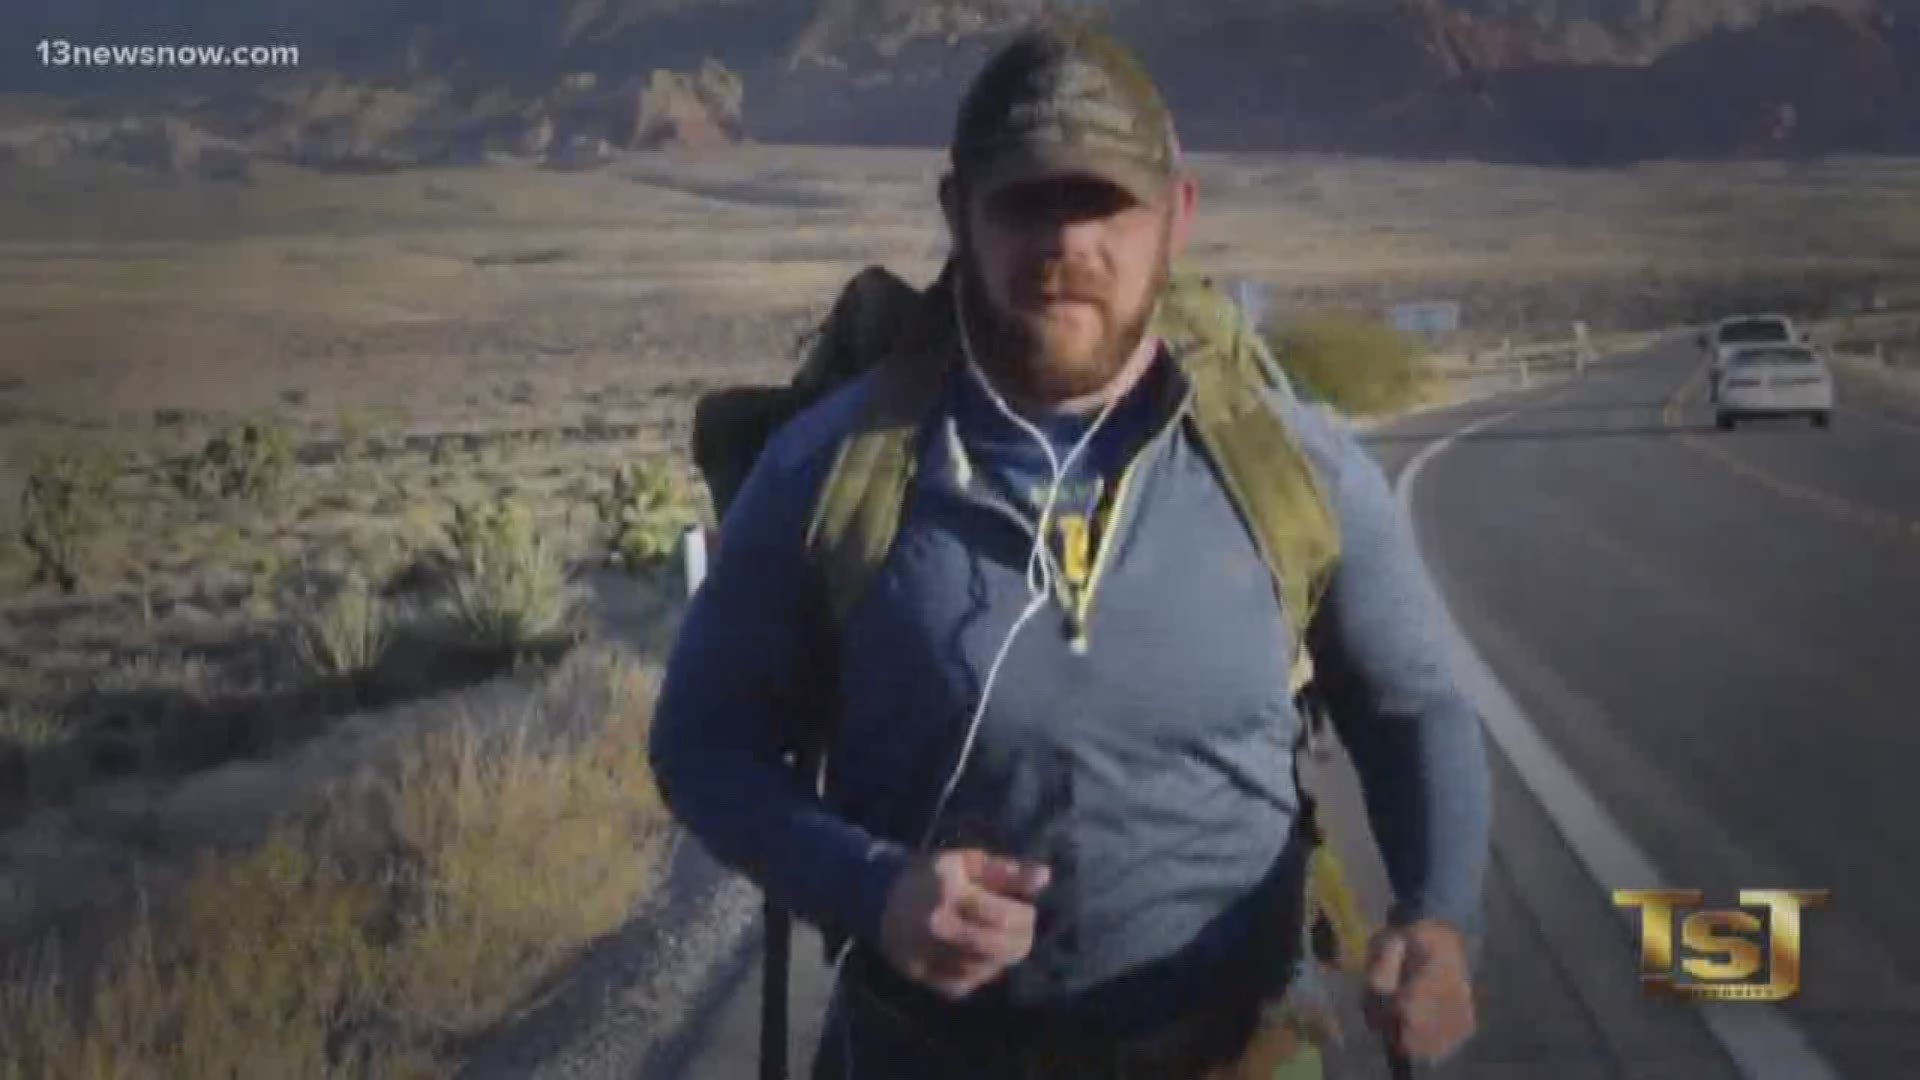 Marine Corps veteran TShane Johnson leaves from New York to walk 1,100 miles to Florida. He's on a mission to help veterans thrive after military service.